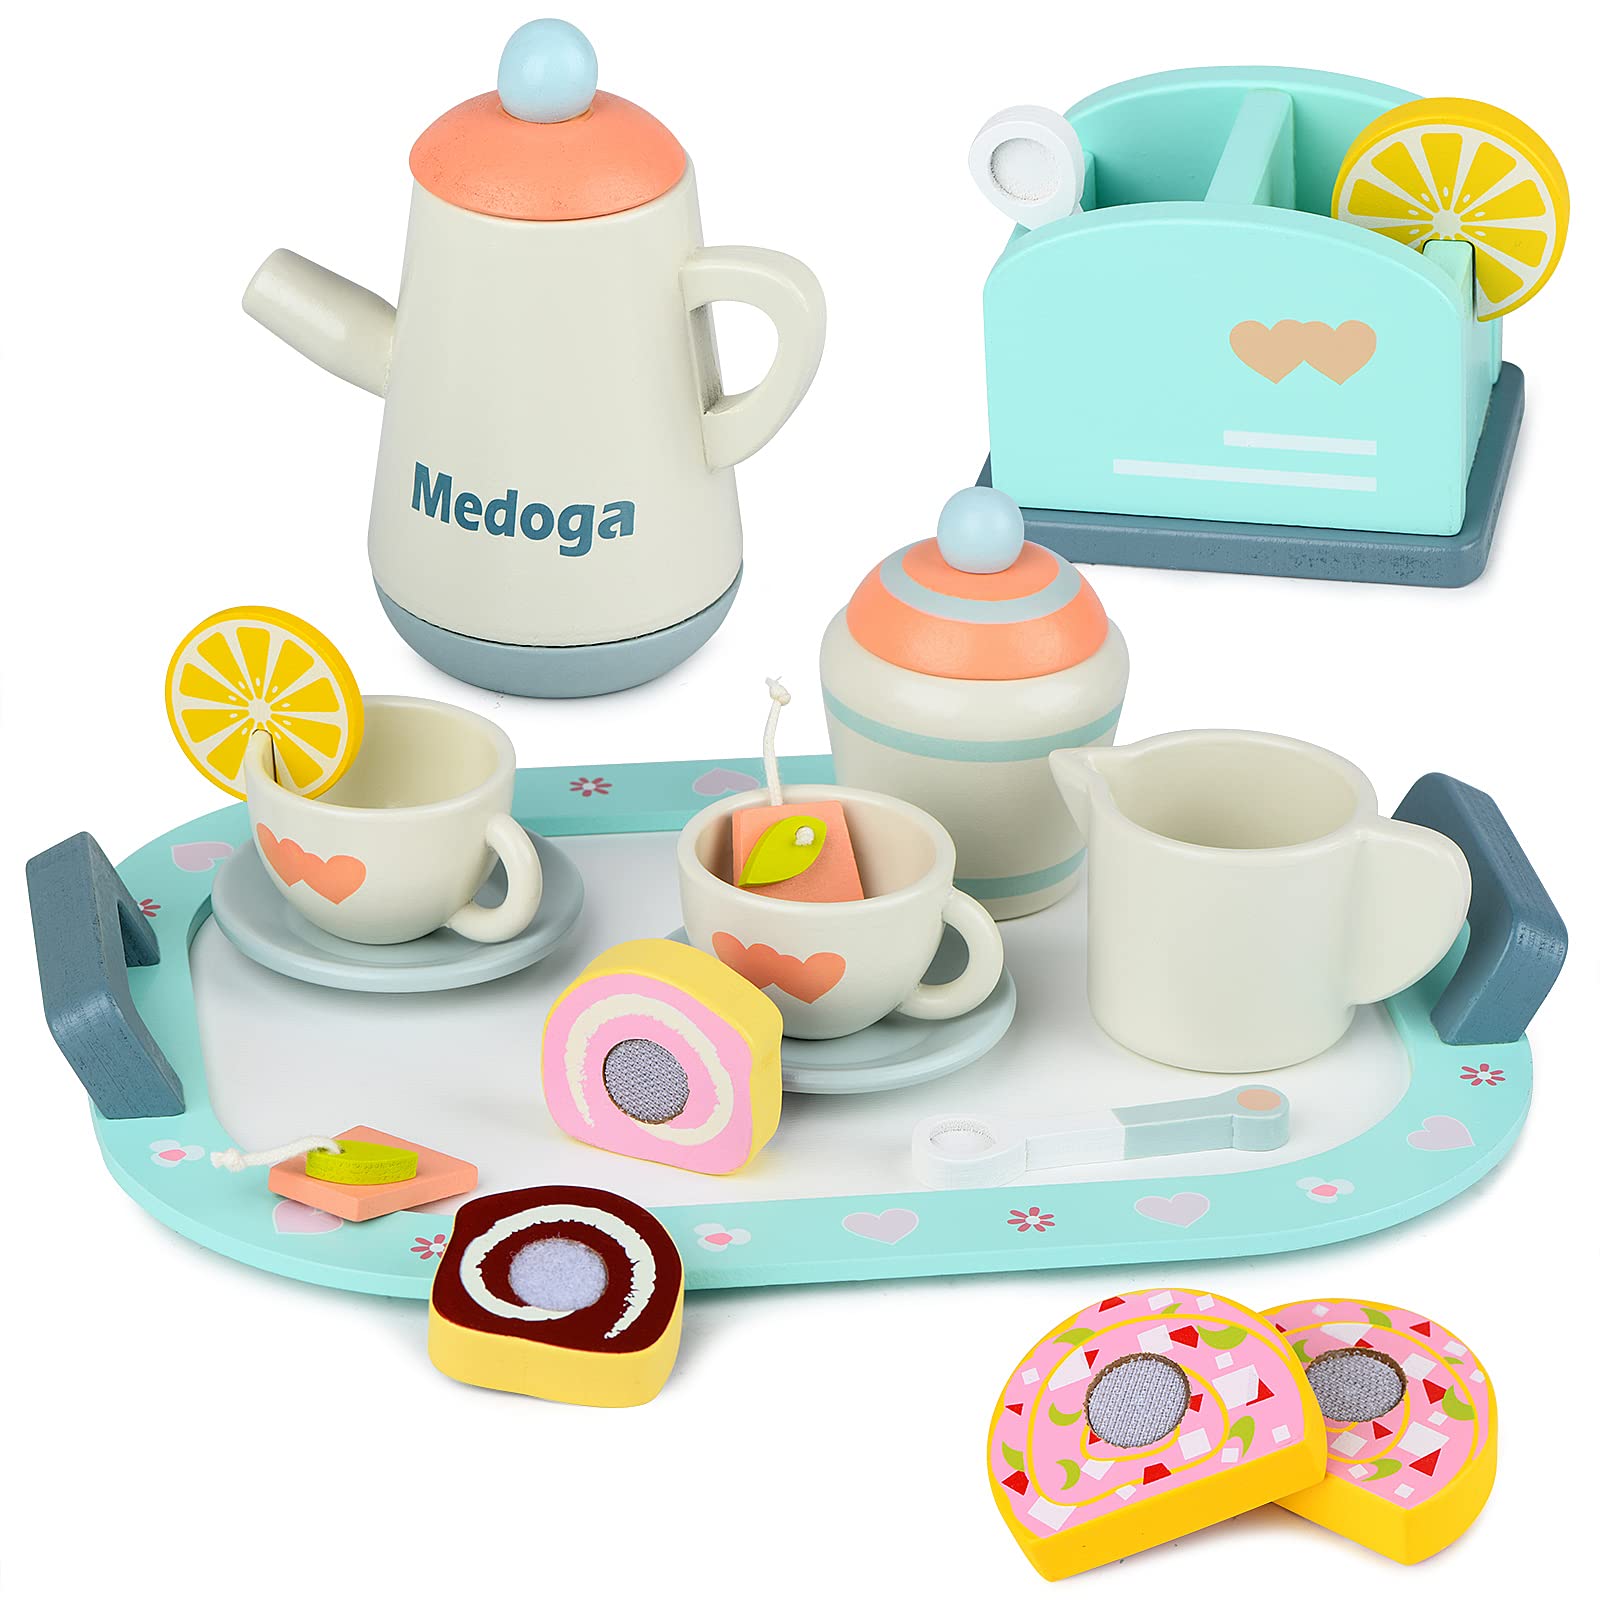 Wooden Tea Set toy Play Kitchen Accessories for Kids Pretend Play Food for Toddlers Tea Party Set for 3, 4, 5 Year Old Girls and Boys (Tea Set)